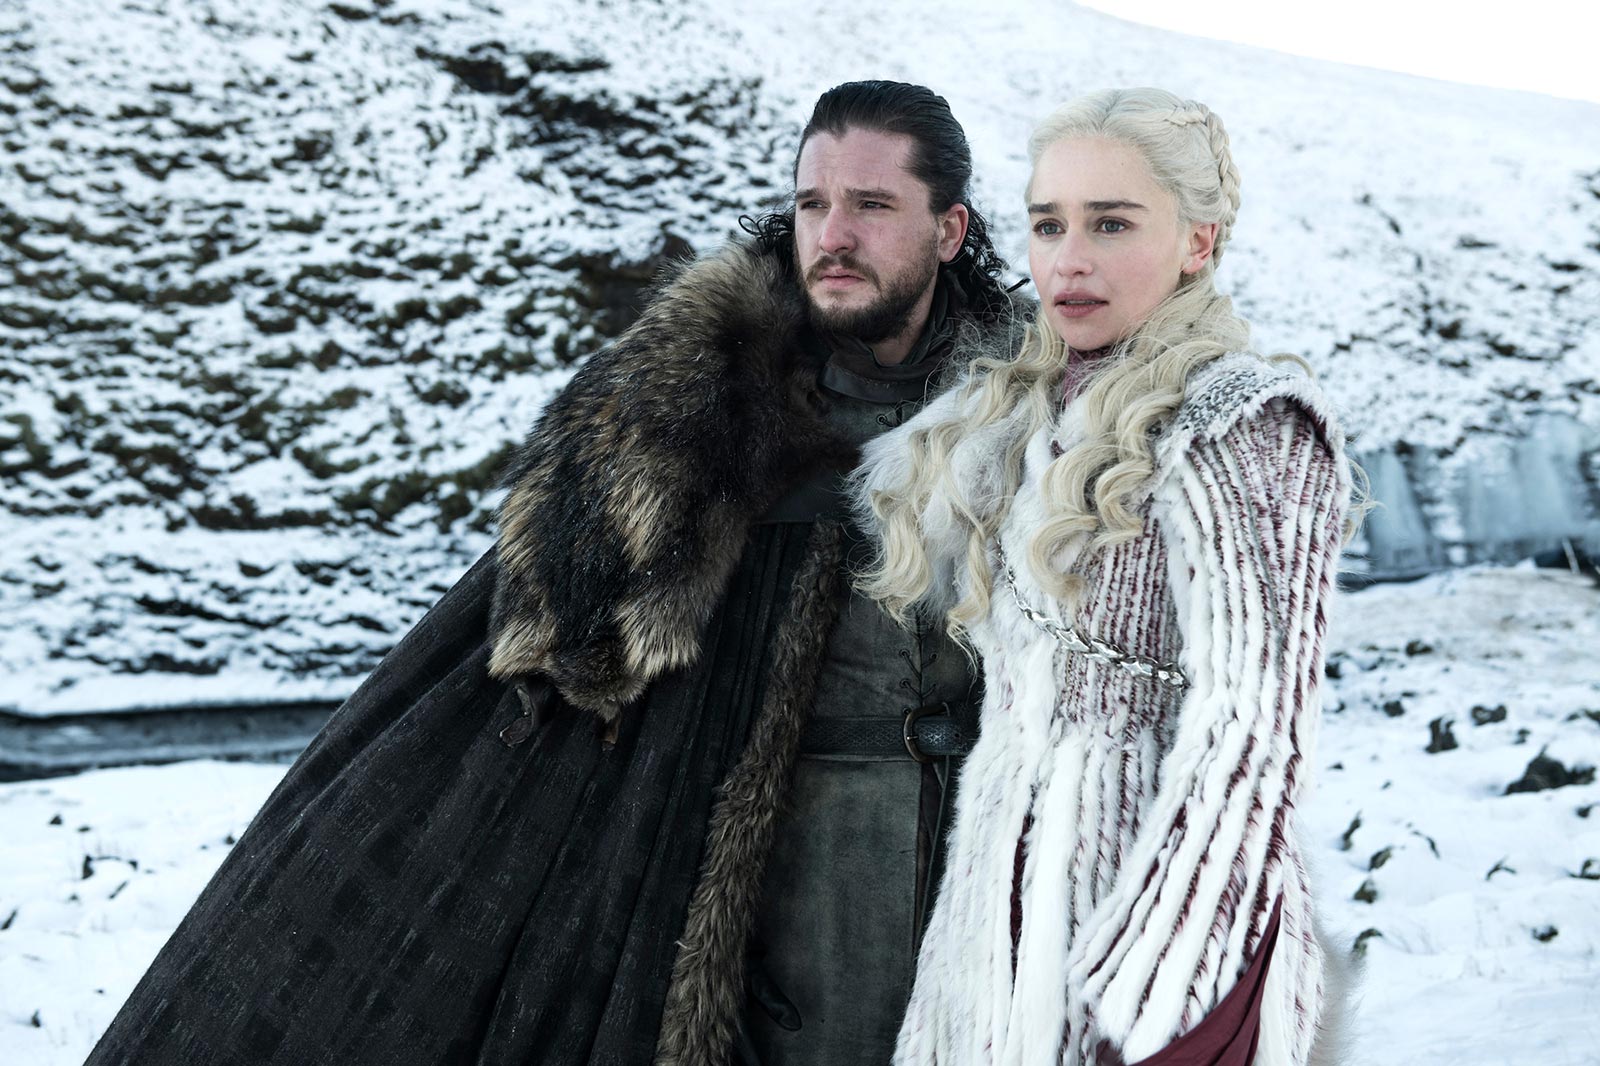 Which Marvel/Game Of Thrones Hybrid Character Are You? Jon Snow and Daenerys Targaryen